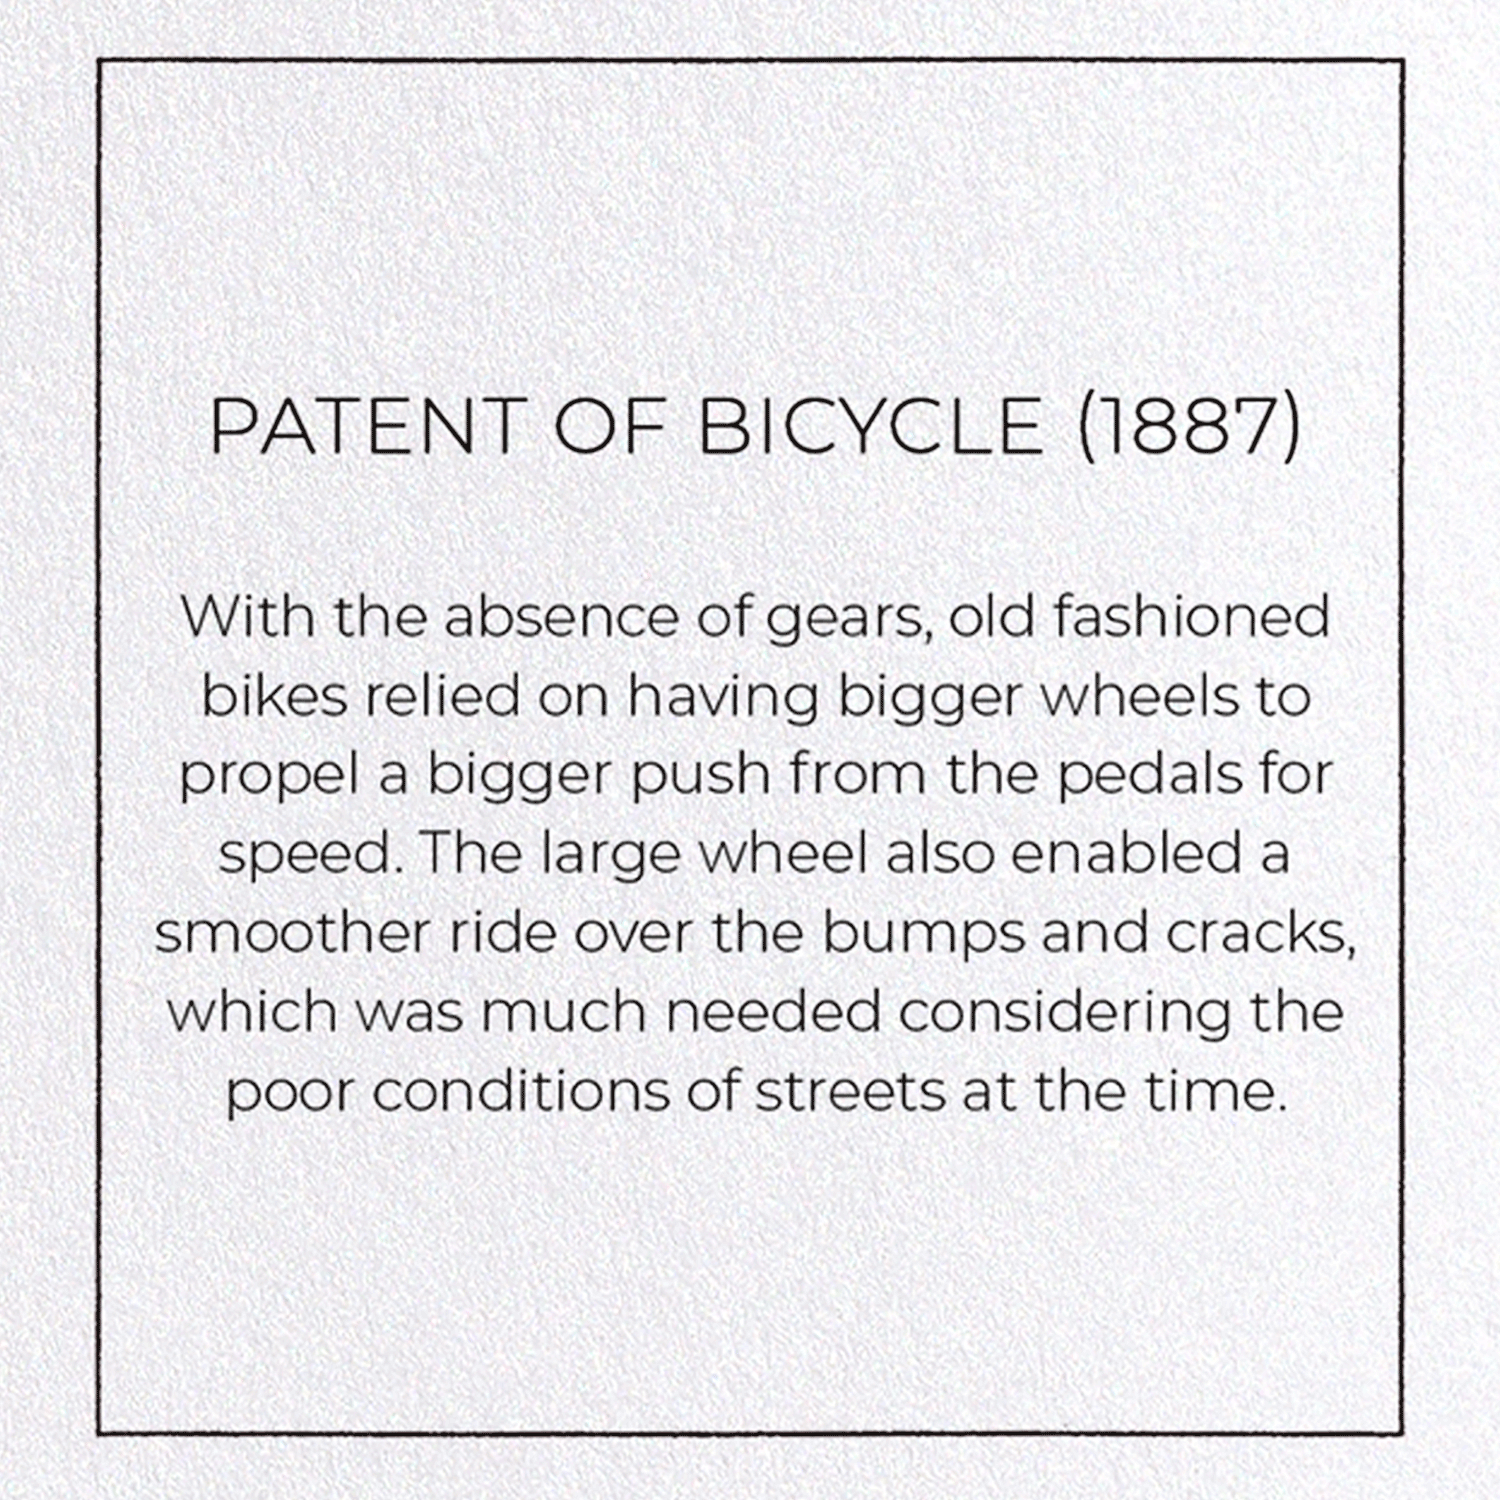 PATENT OF BICYCLE (1887)